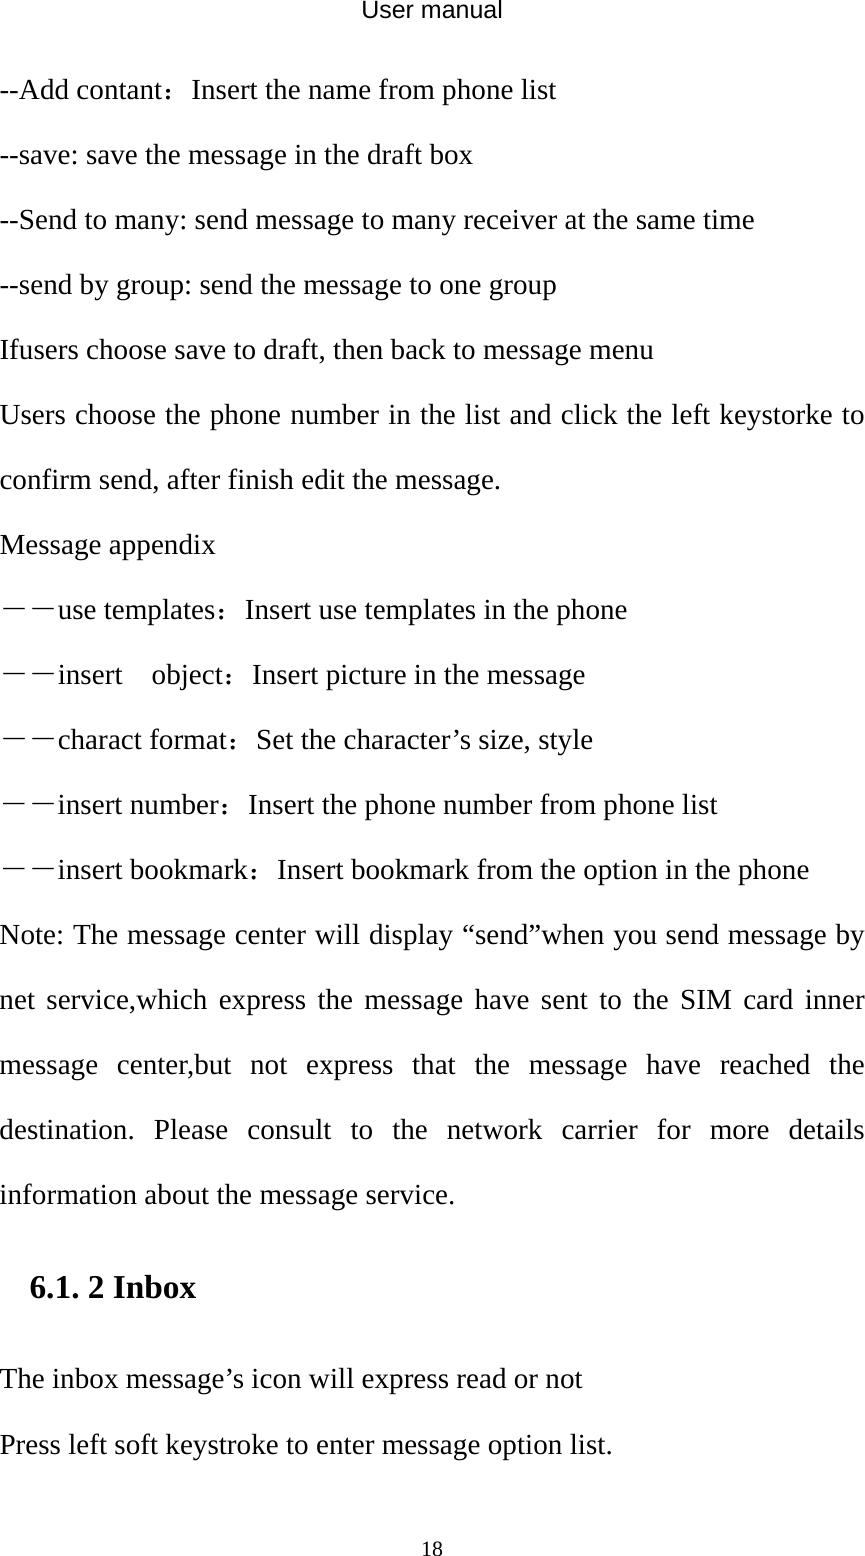 User manual  18--Add contant：Insert the name from phone list --save: save the message in the draft box --Send to many: send message to many receiver at the same time --send by group: send the message to one group Ifusers choose save to draft, then back to message menu Users choose the phone number in the list and click the left keystorke to confirm send, after finish edit the message. Message appendix   ――use templates：Insert use templates in the phone ――insert  object：Insert picture in the message ――charact format：Set the character’s size, style ――insert number：Insert the phone number from phone list ――insert bookmark：Insert bookmark from the option in the phone Note: The message center will display “send”when you send message by net service,which express the message have sent to the SIM card inner message center,but not express that the message have reached the destination. Please consult to the network carrier for more details information about the message service. 6.1. 2 Inbox The inbox message’s icon will express read or not Press left soft keystroke to enter message option list.   